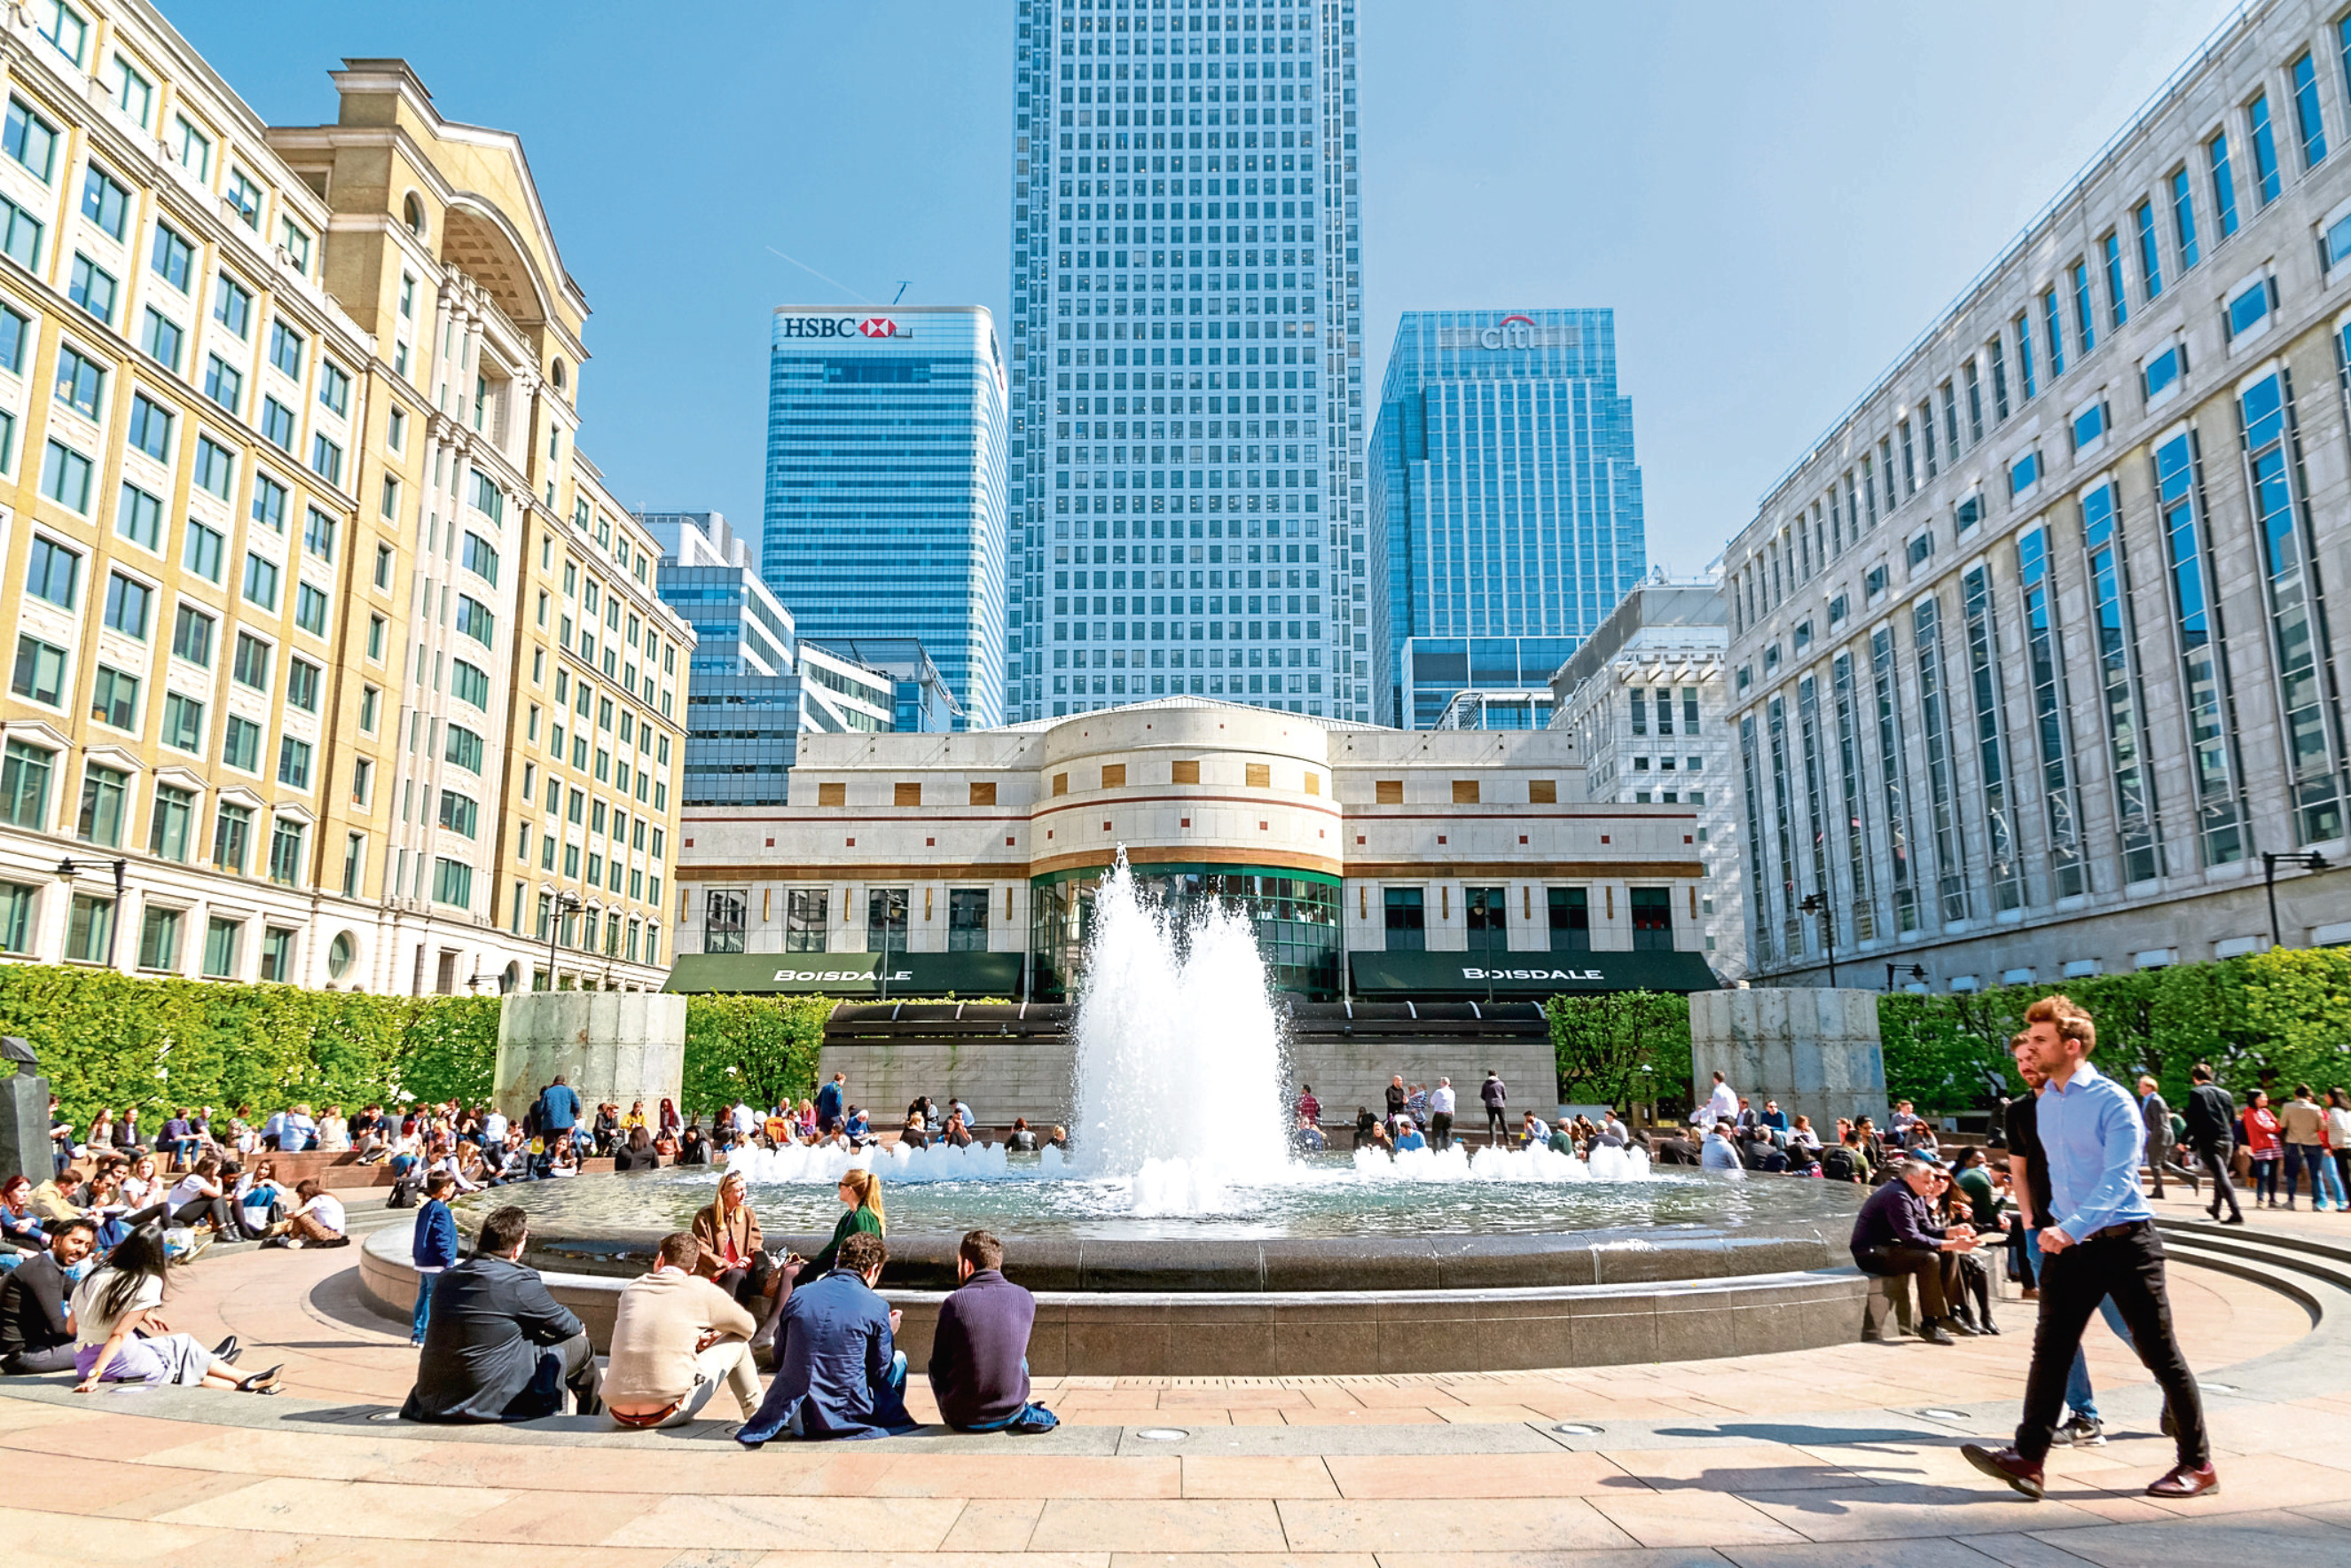 Cabot Square in Canary Wharf